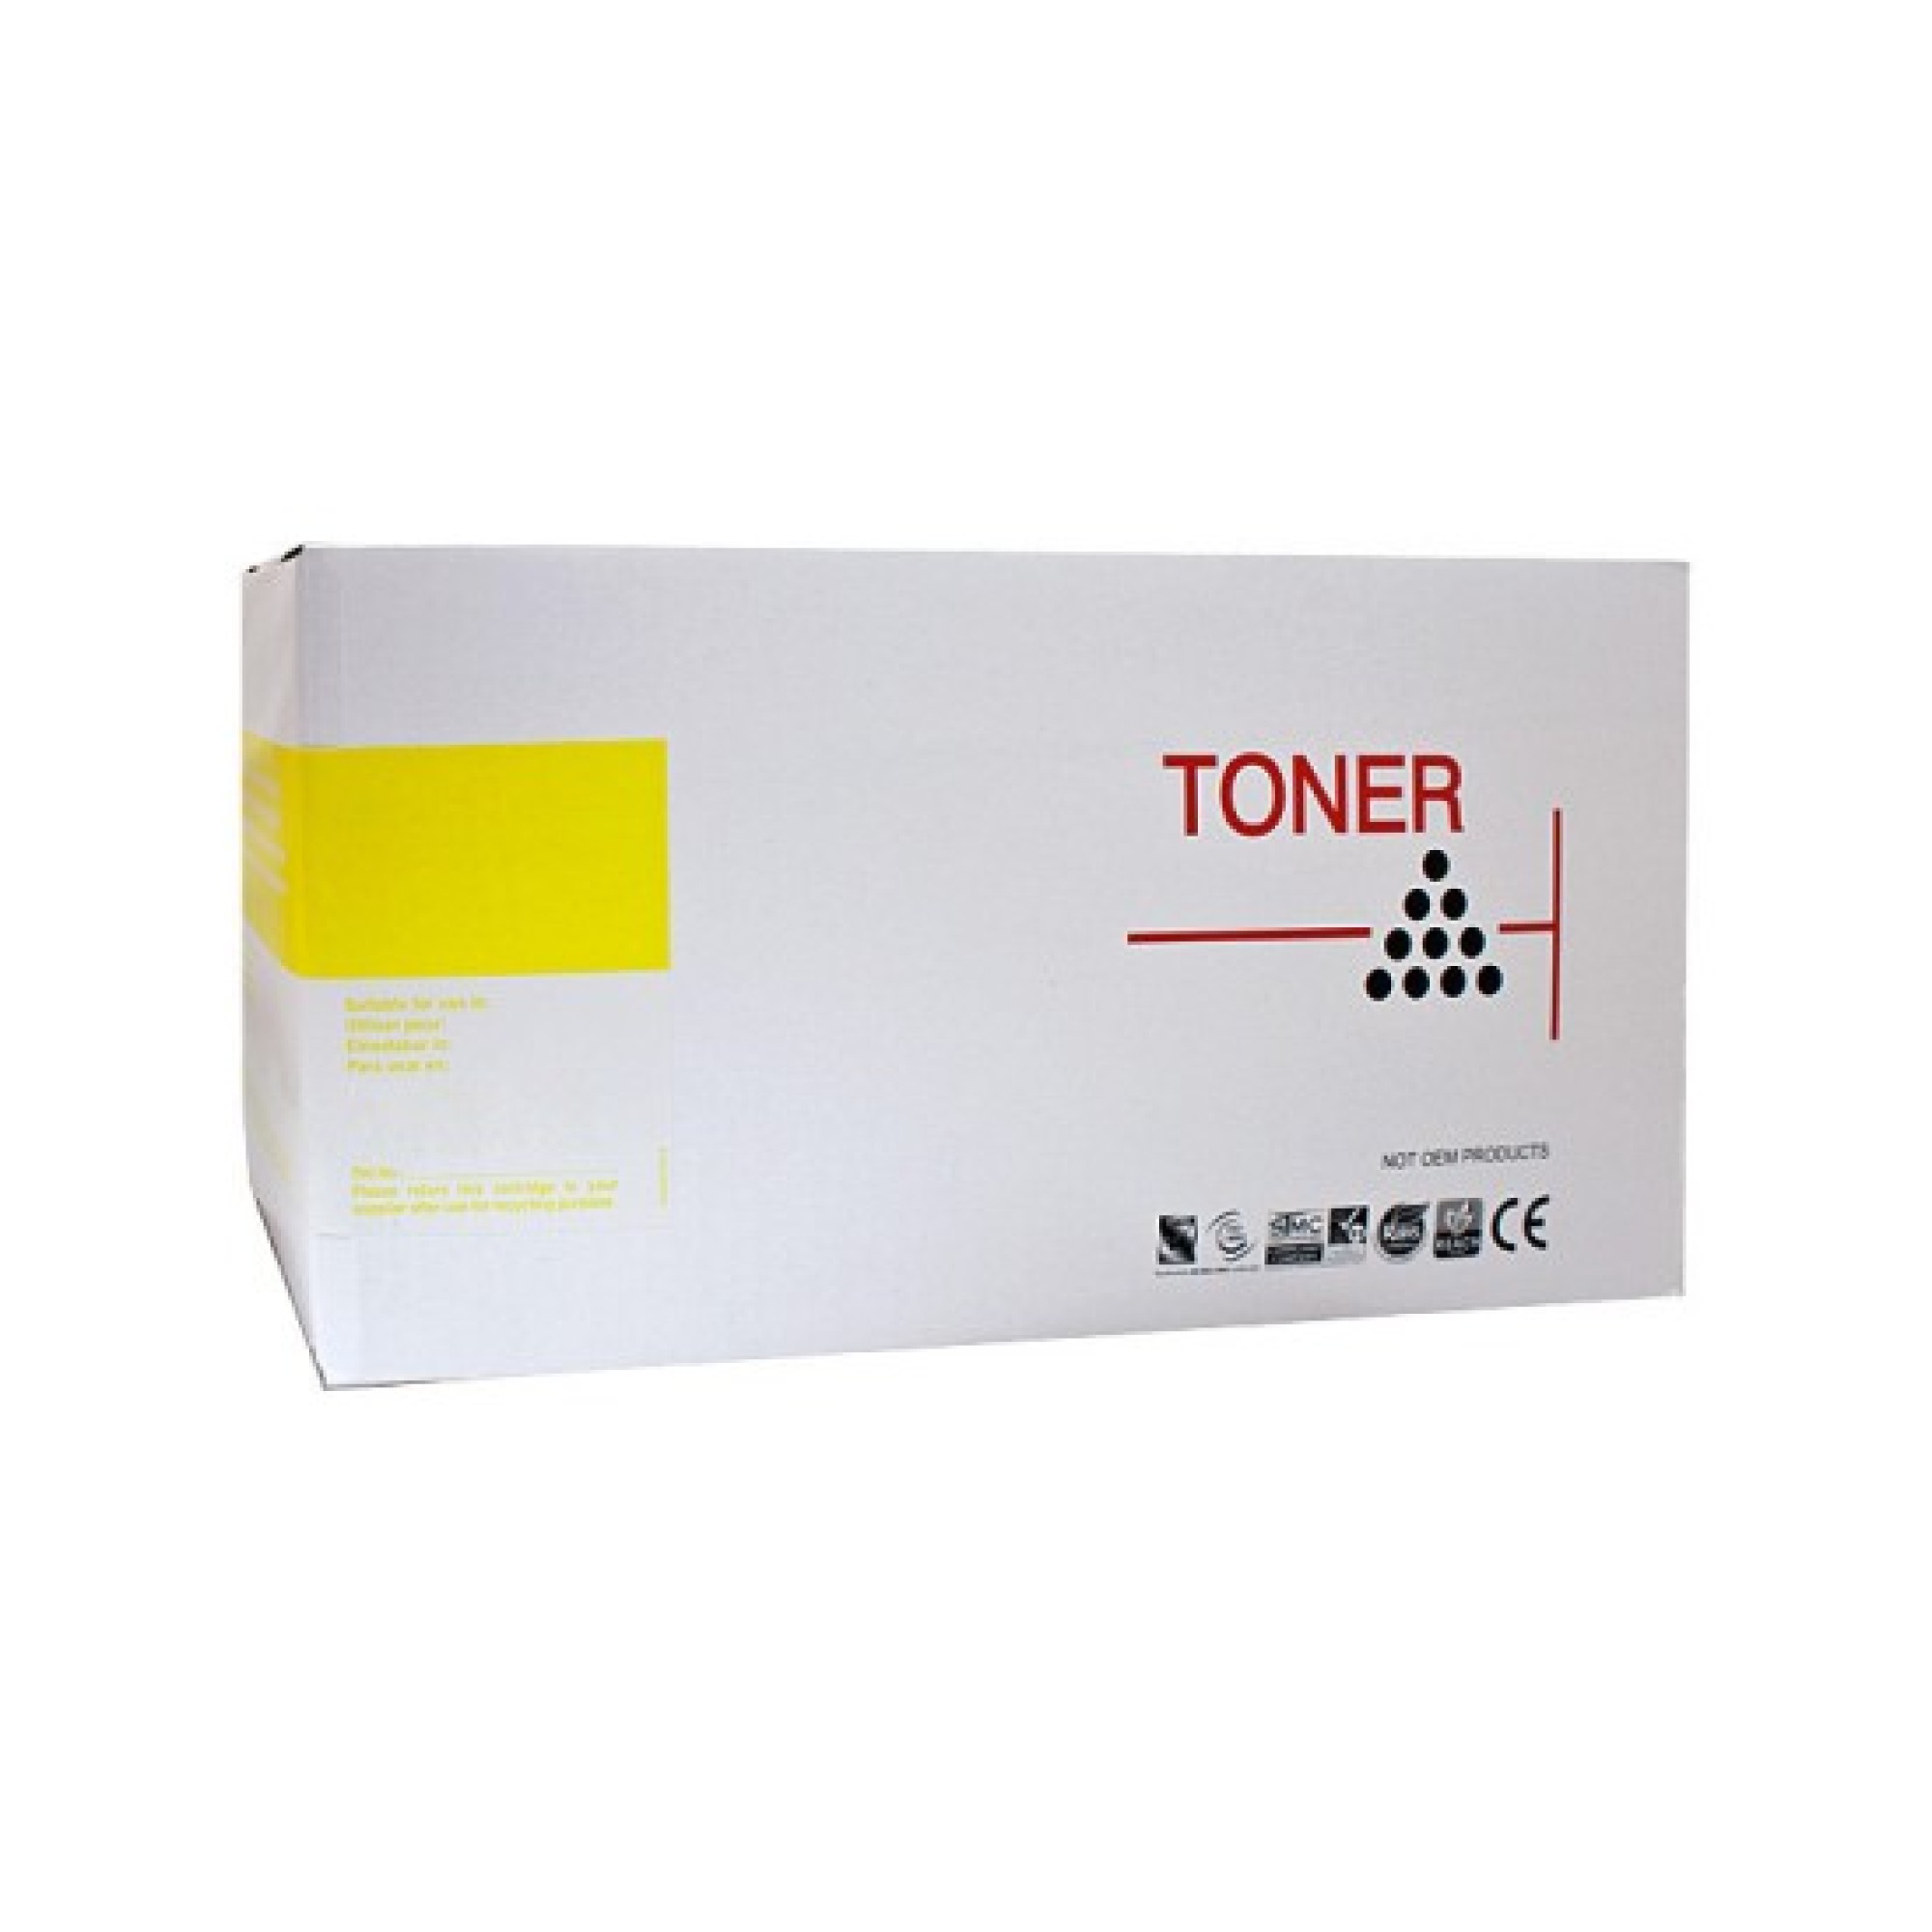 HP 305A CE412 Yellow Toner Compatible